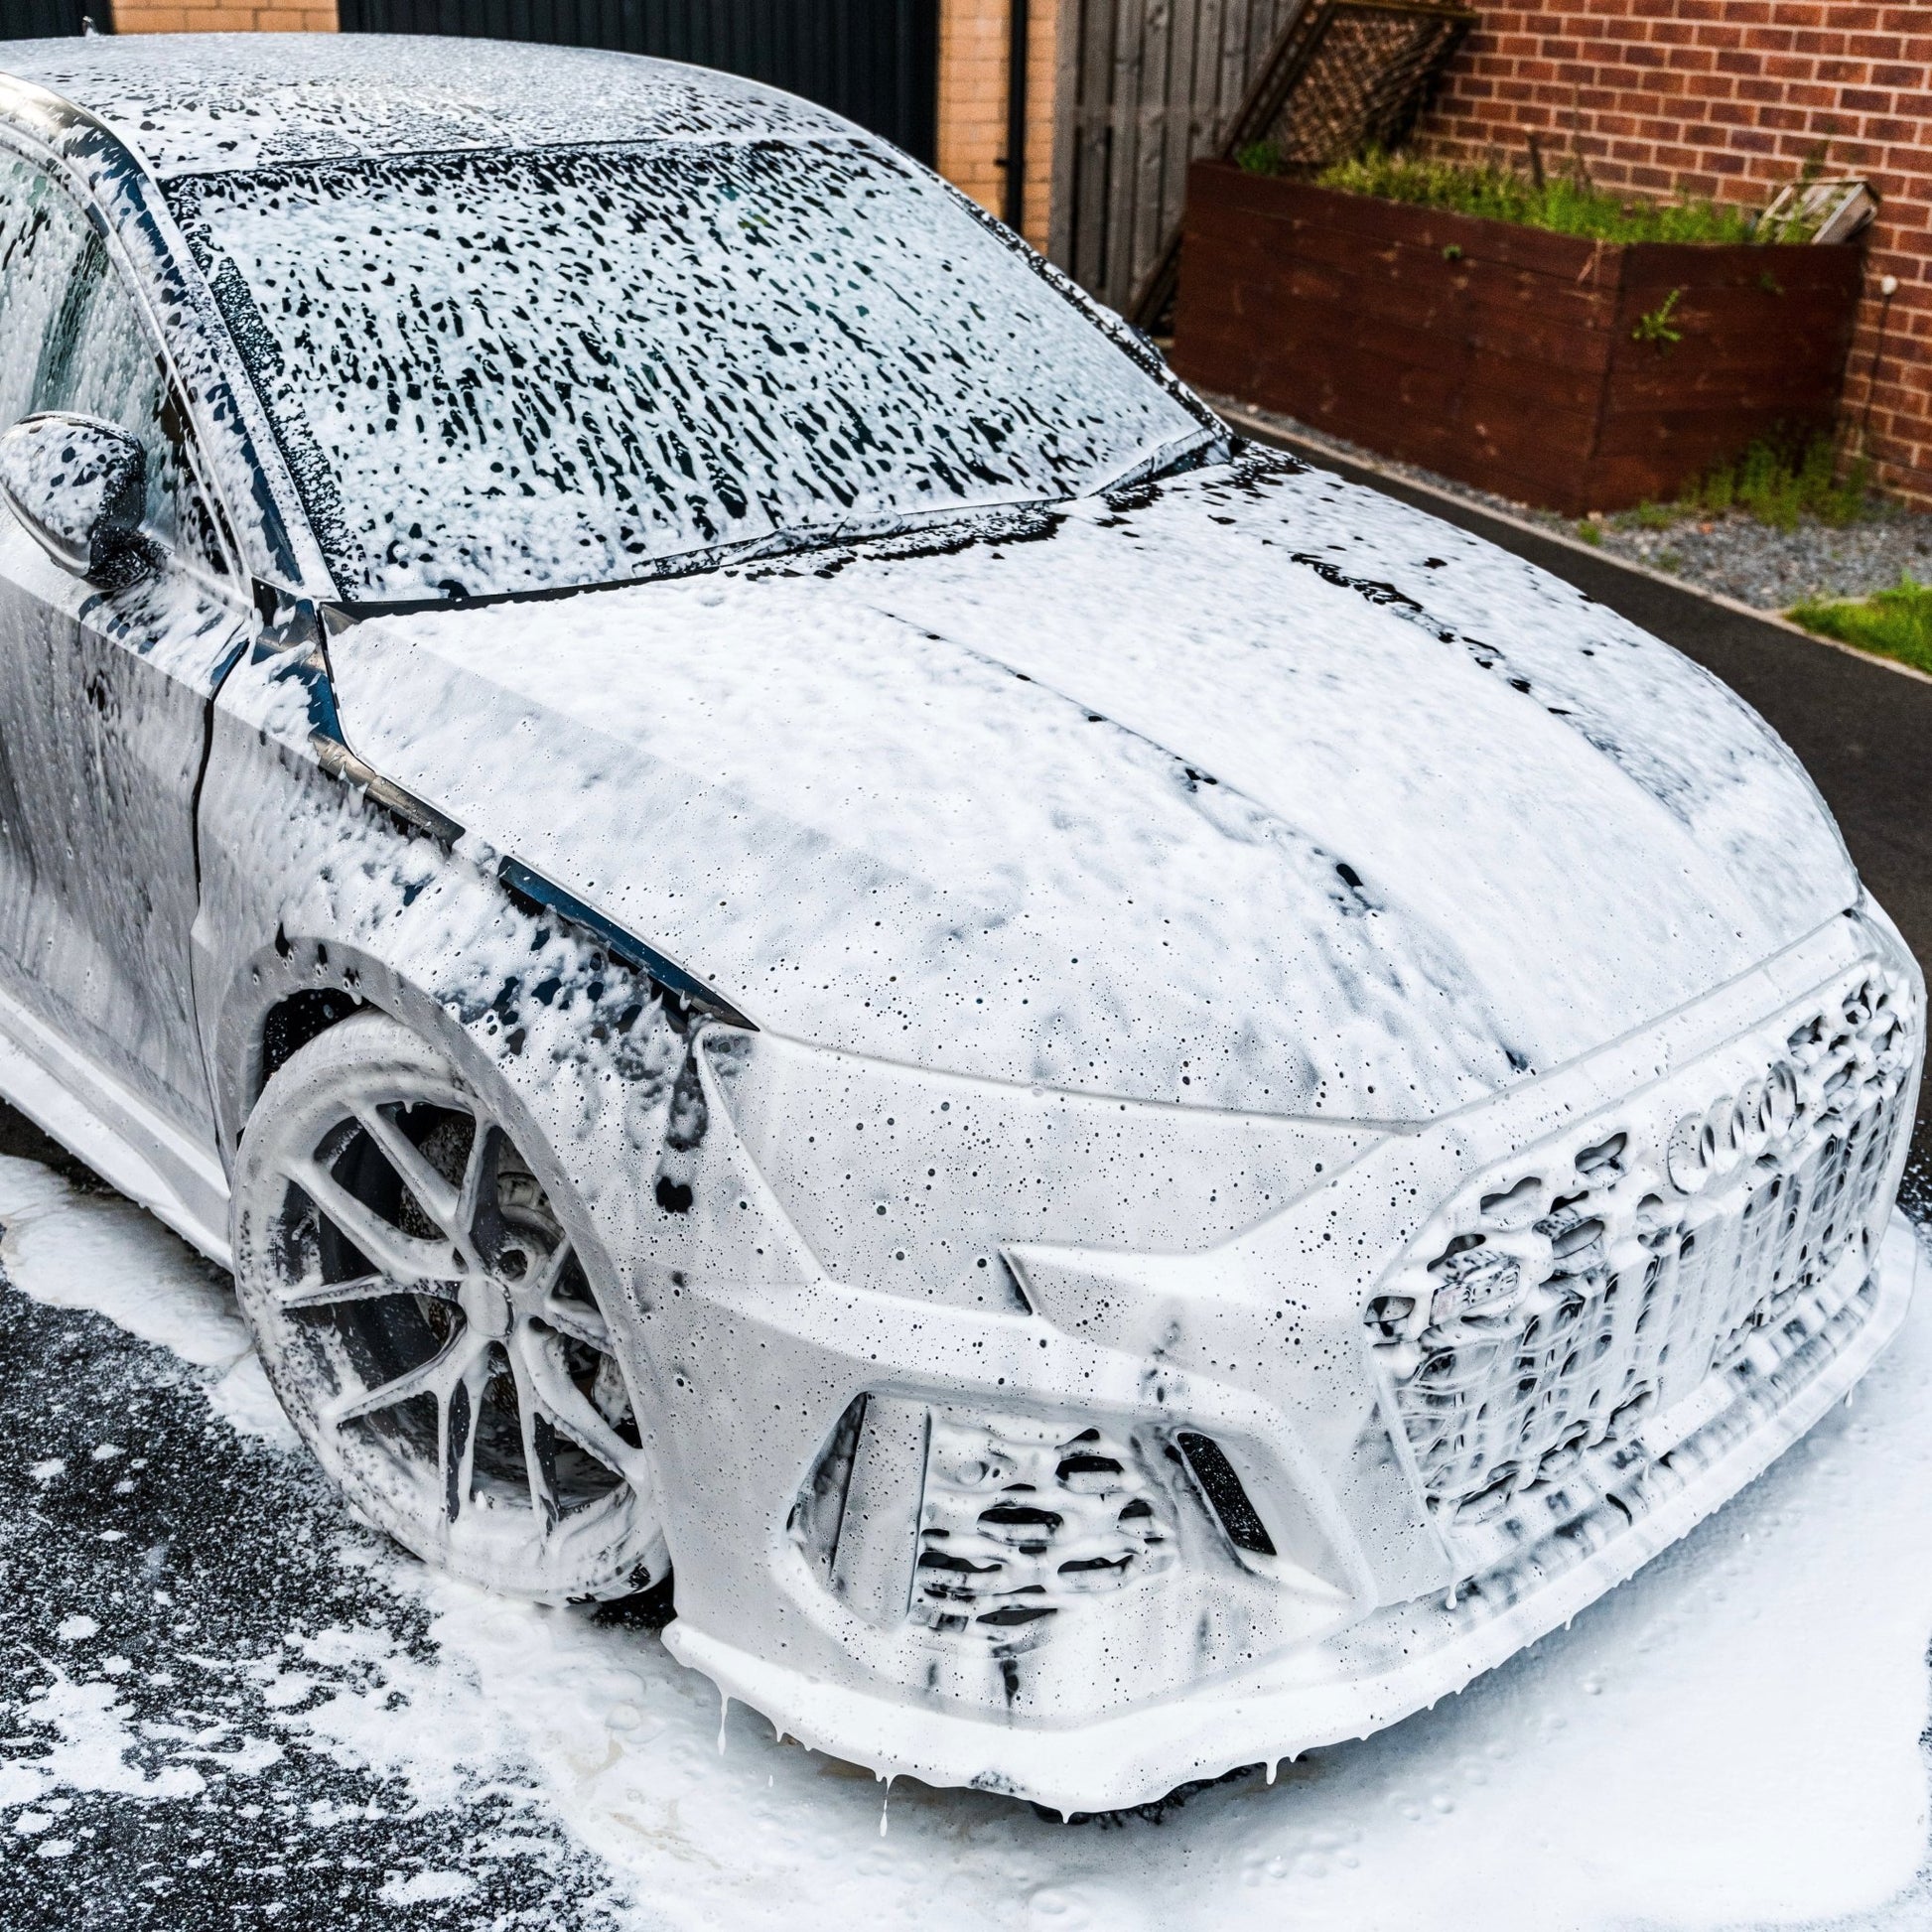 What is snowfoam - DetailingWiki, the free wiki for detailers